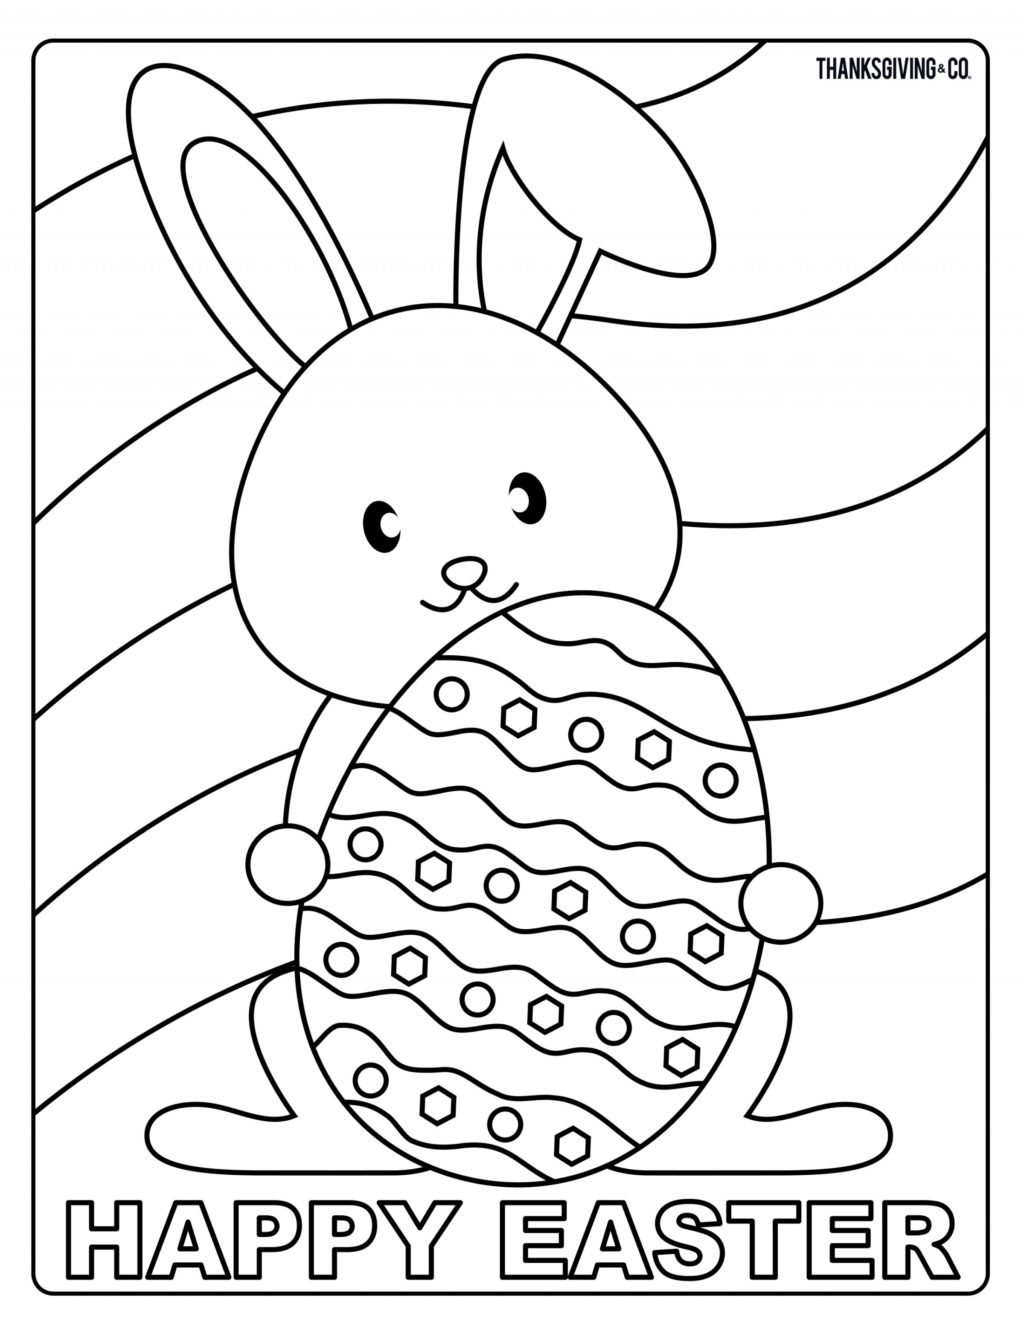 Spring Coloring Pages For Toddlers Coloring Book World Coloringbook Easterbunny Free Spring Coloring